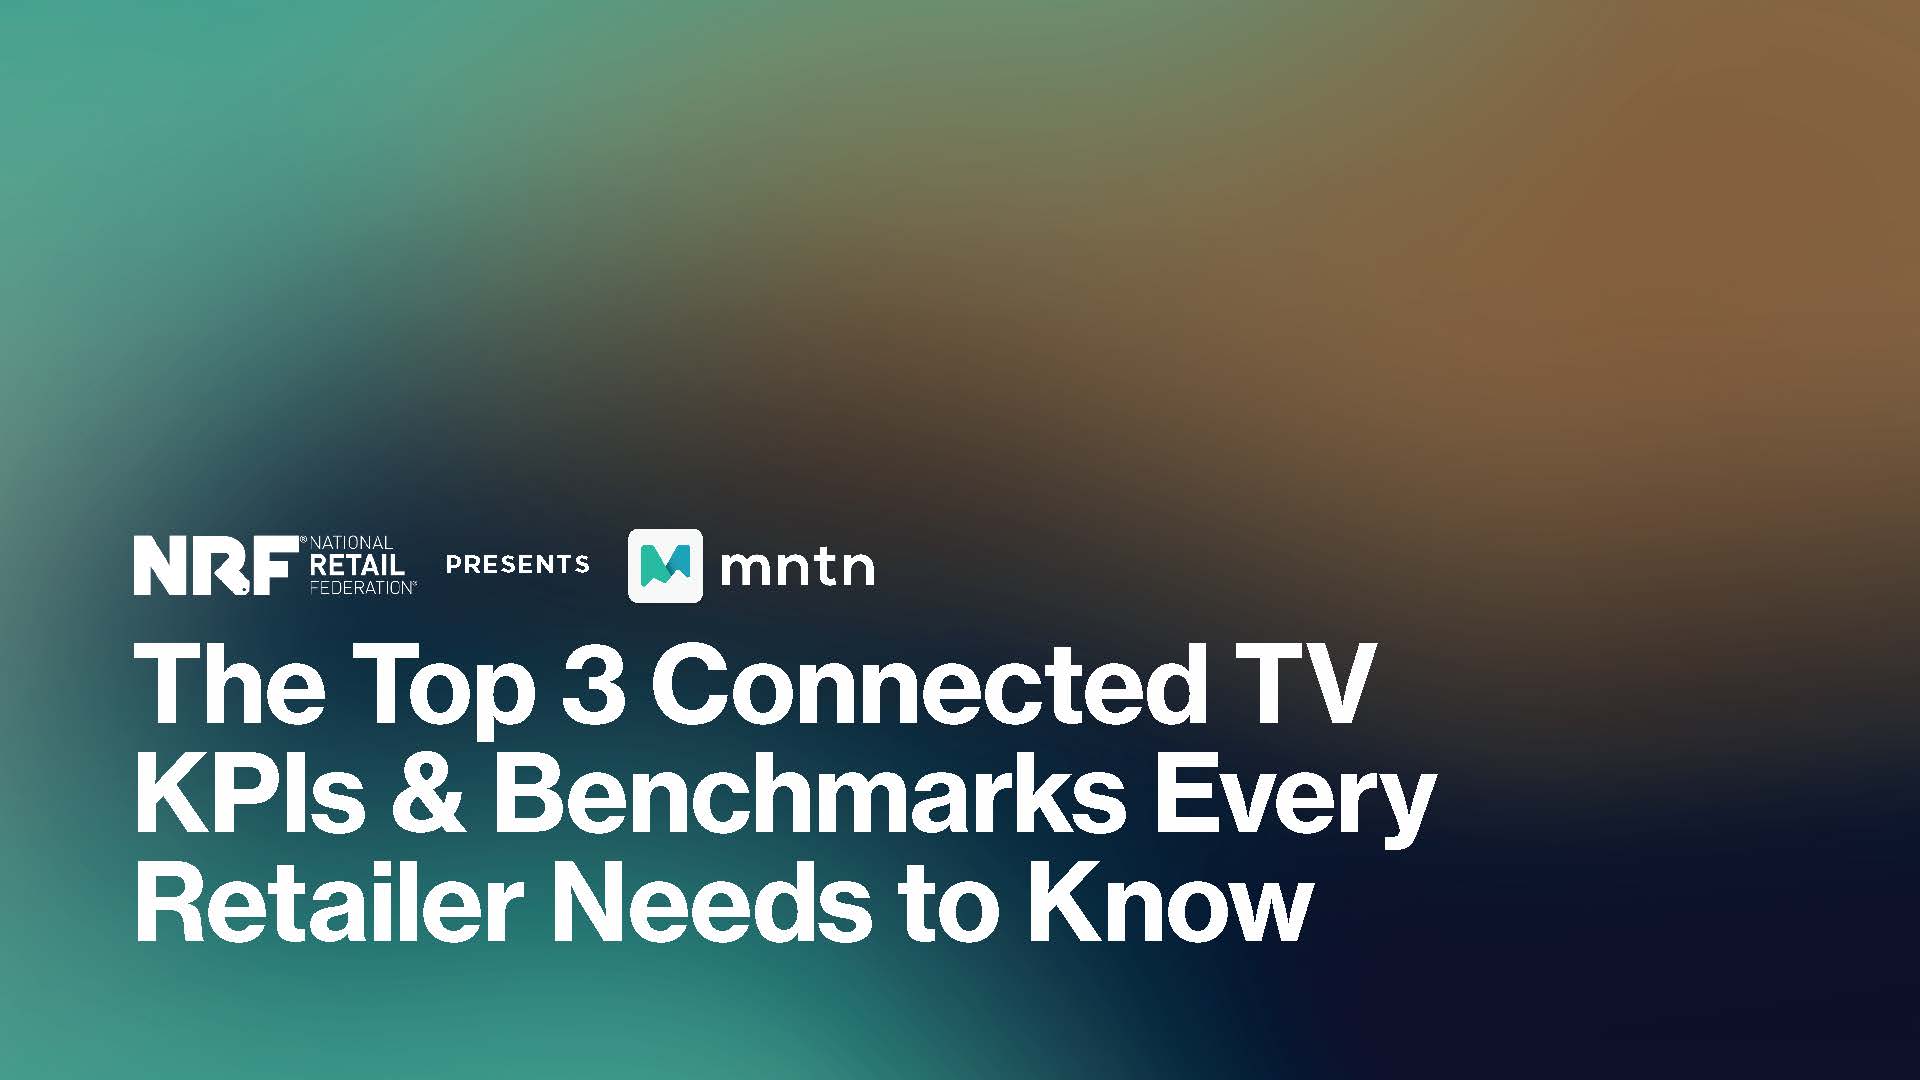 The Top 3 Connected TV KPIs & Benchmarks Every Retailer Needs to Know